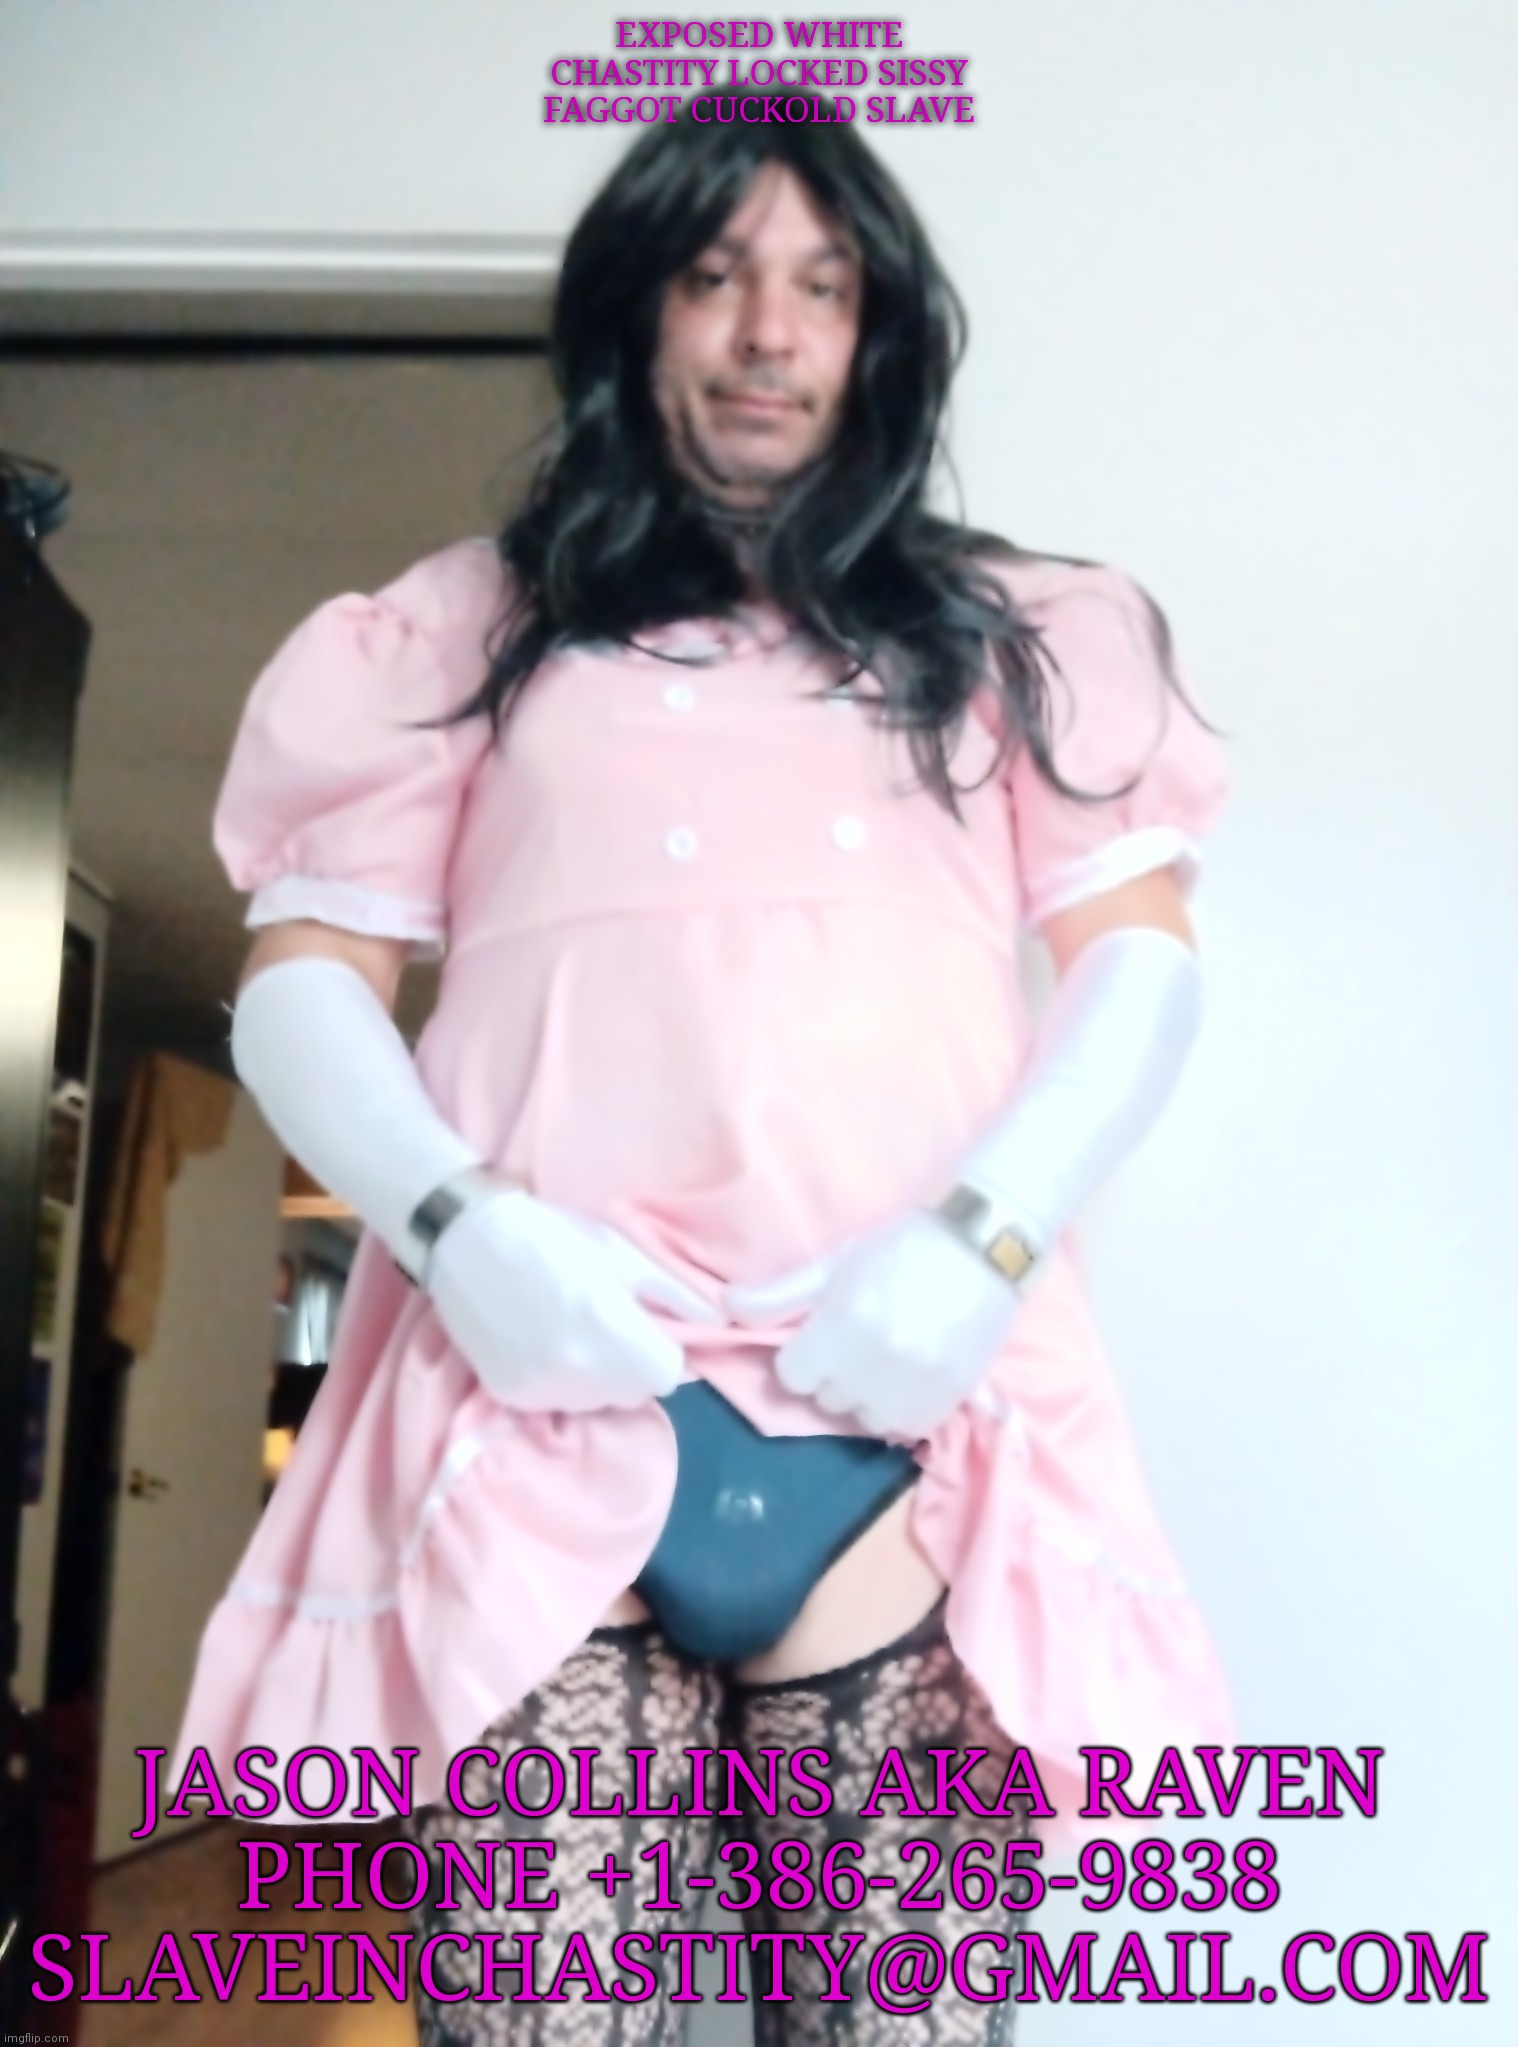 Sissyraven88 the info keeps going